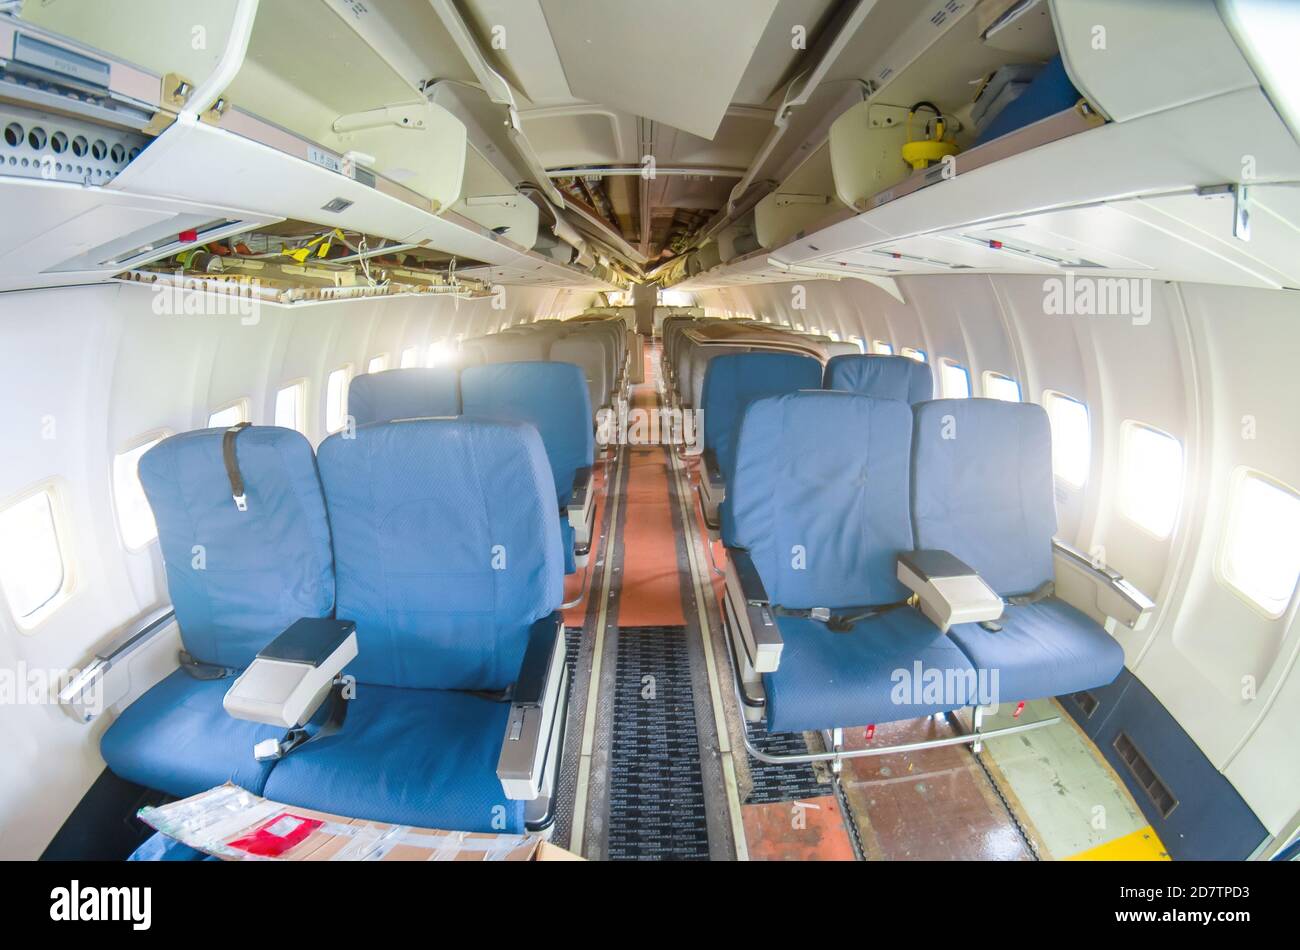 Destroyed passenger cabin aircraft. Torn off passenger seats destroyed interior cabin airplane with seats, for repairs Stock Photo